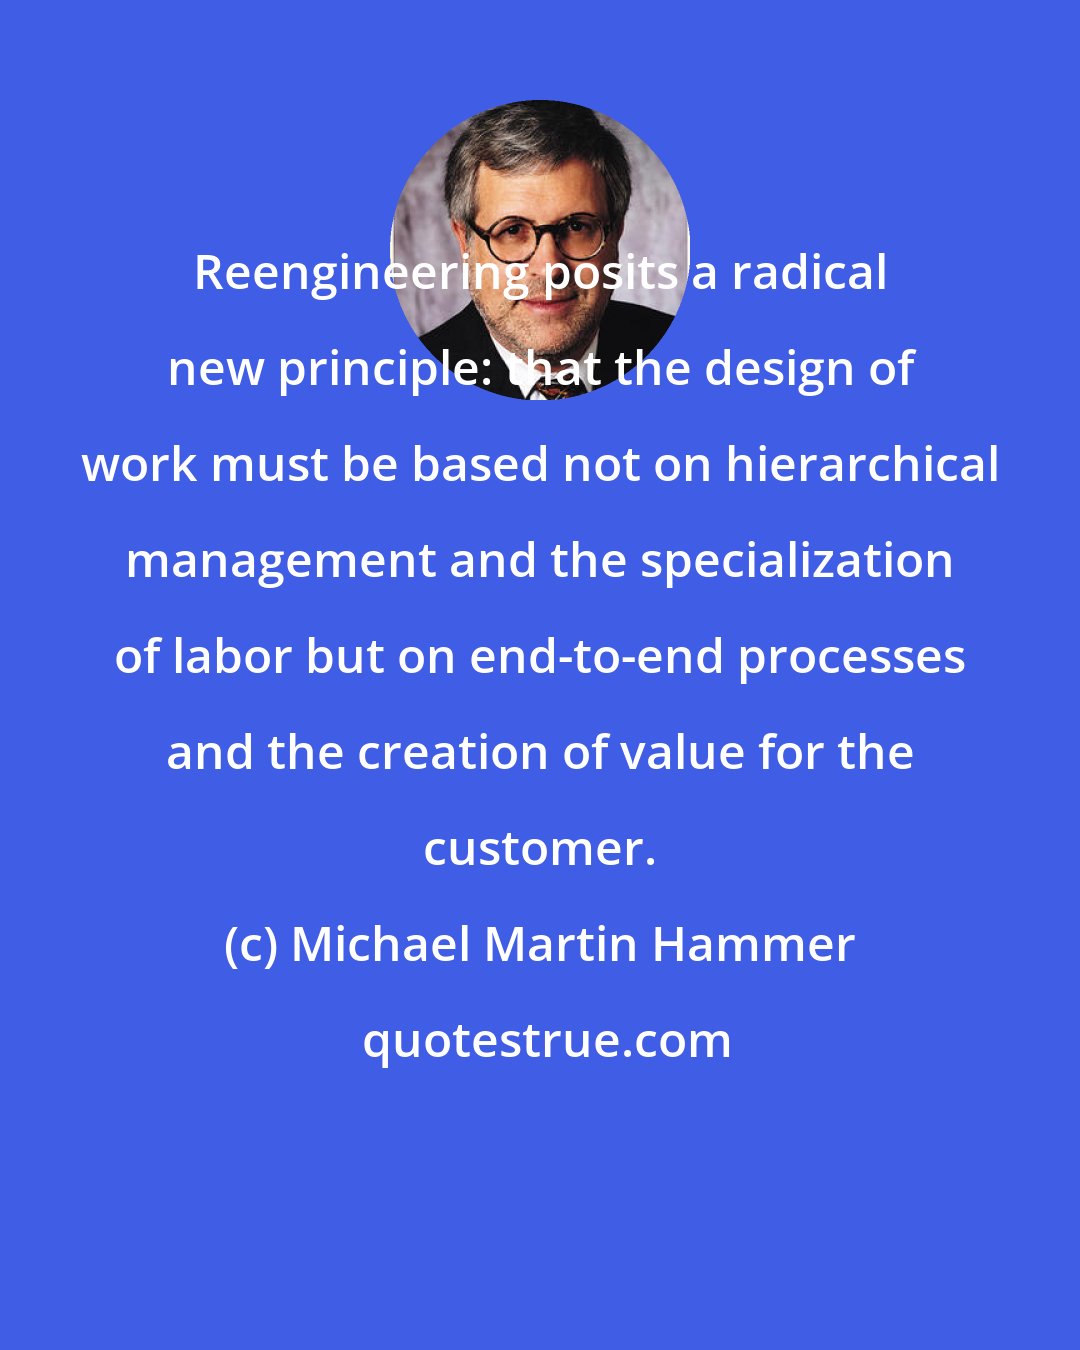 Michael Martin Hammer: Reengineering posits a radical new principle: that the design of work must be based not on hierarchical management and the specialization of labor but on end-to-end processes and the creation of value for the customer.